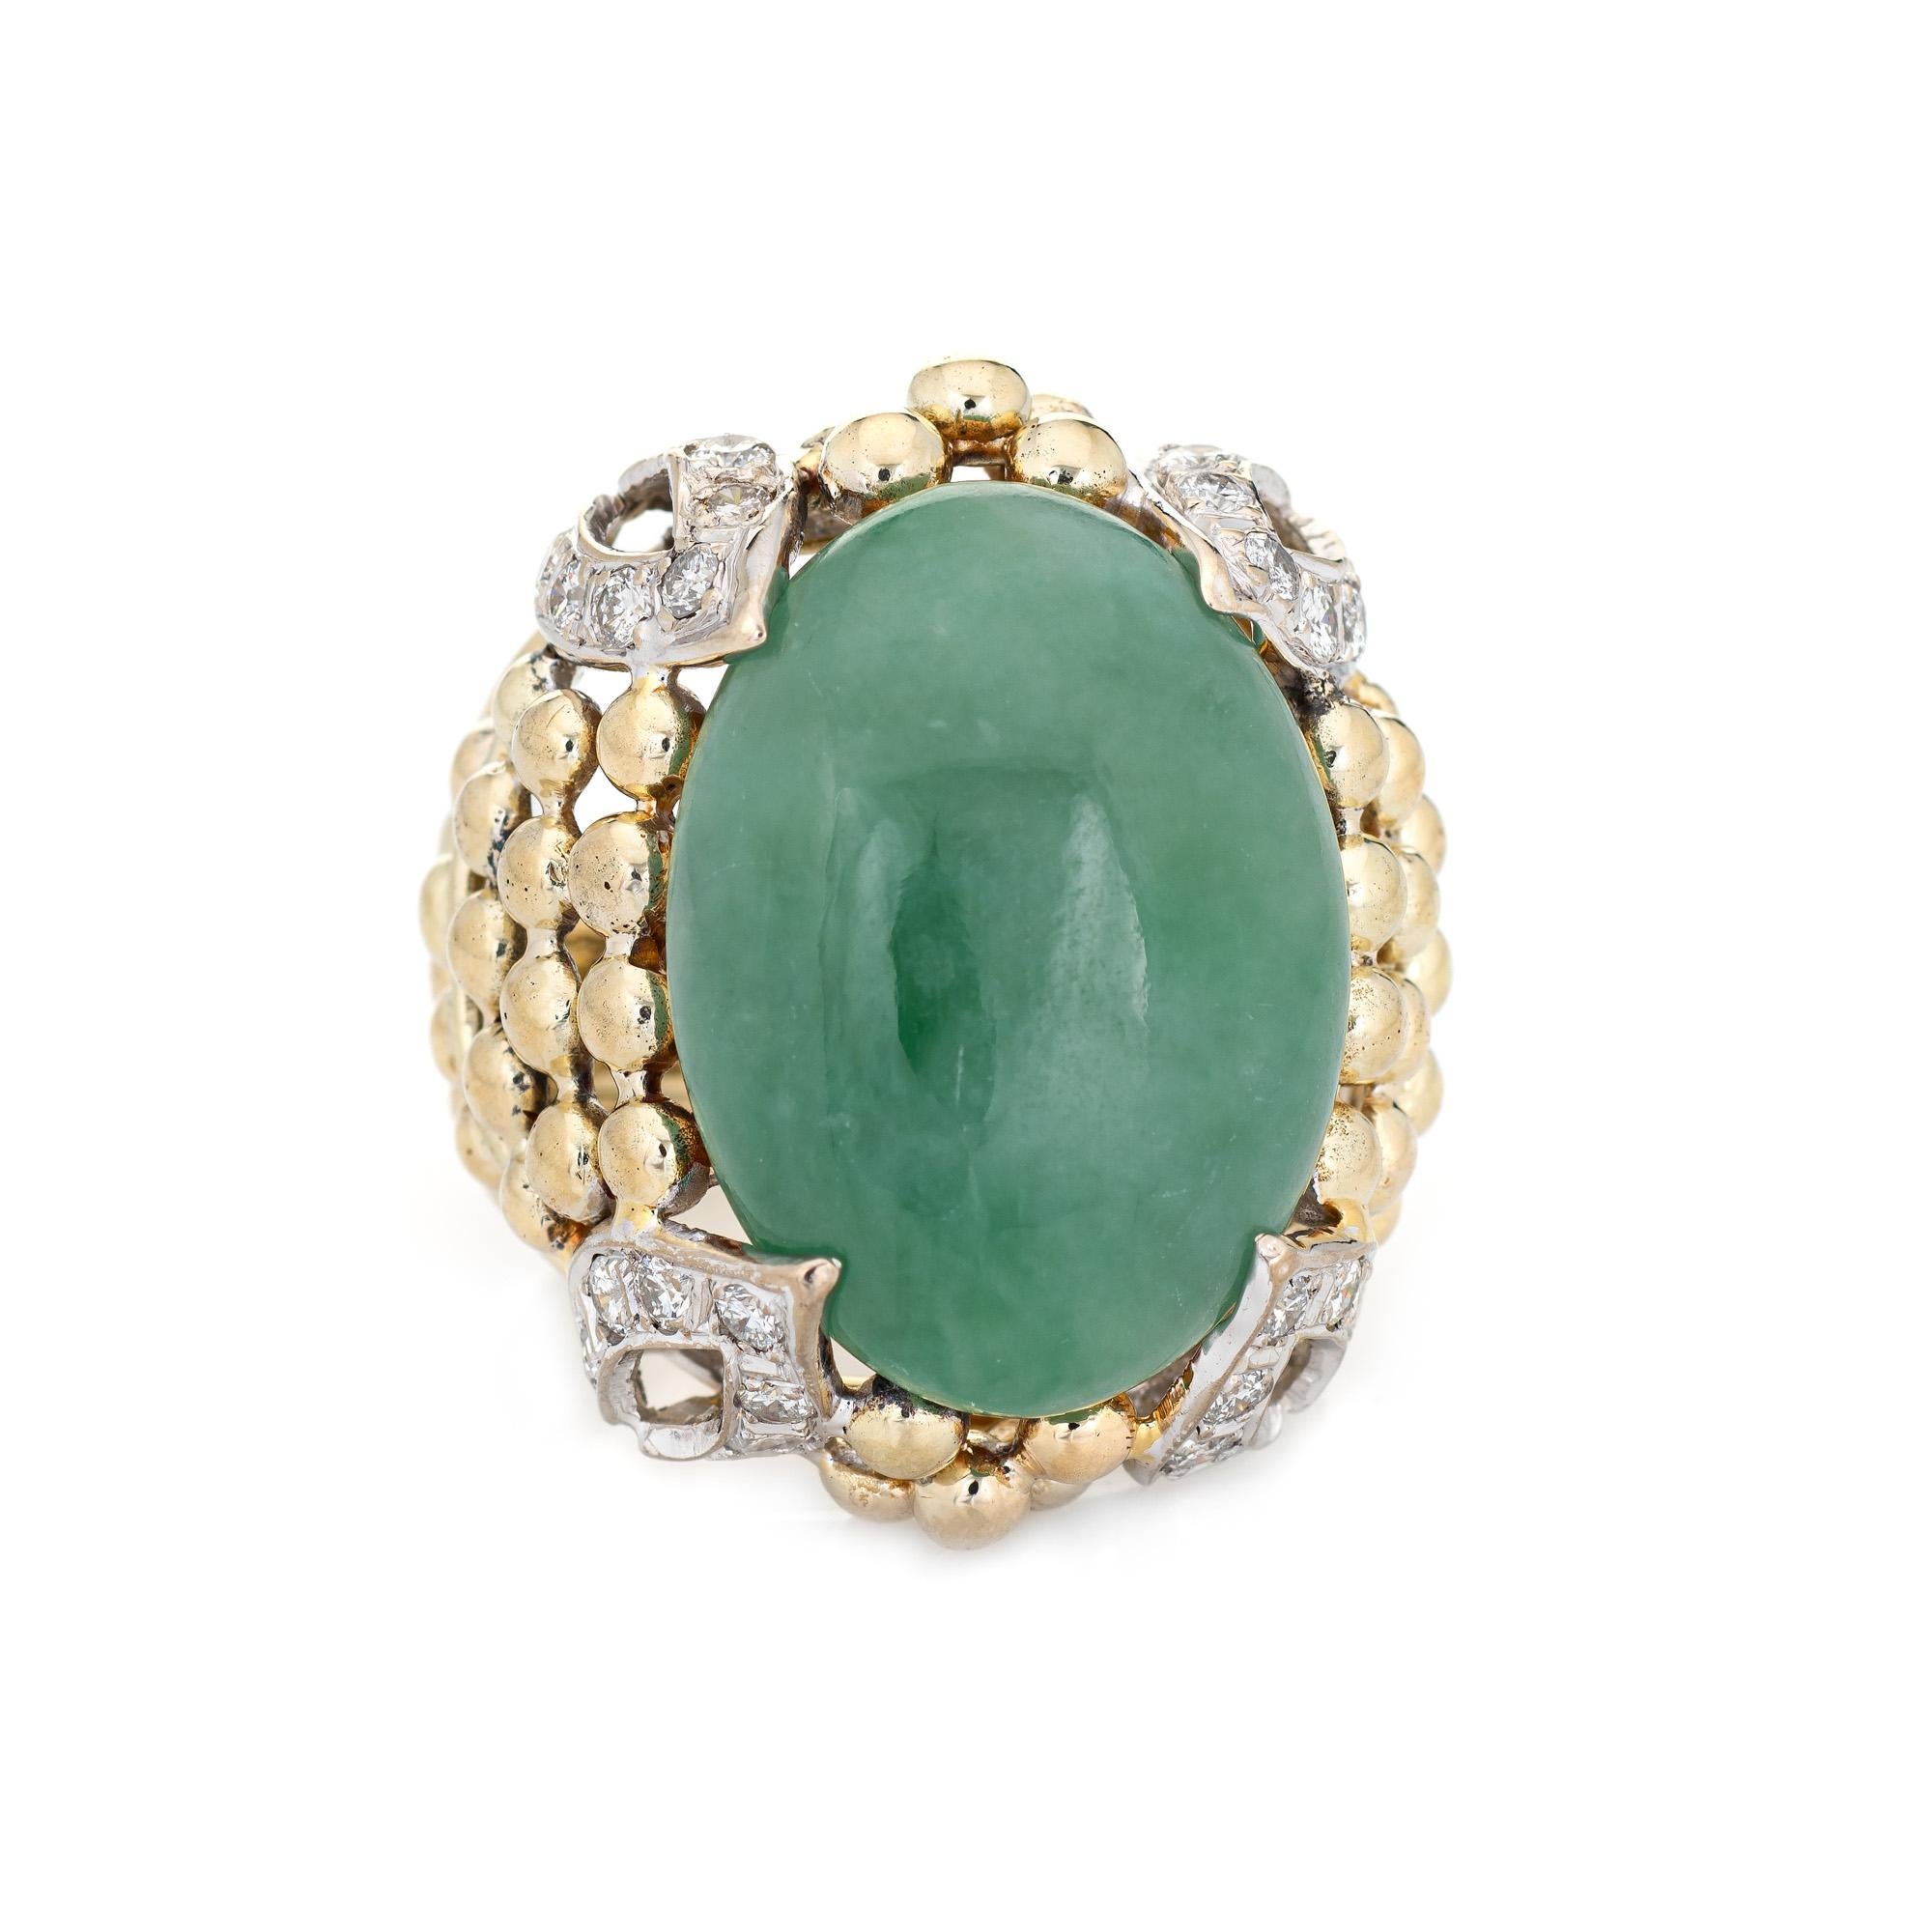 Stylish vintage jade & diamond cocktail ring (circa 1960s) crafted in 18 karat yellow gold. 

Cabochon cut jade measures 22mm x 16mm (estimated at 14 carats). The jade is in very good condition and free of cracks or chips. 28 diamonds total an